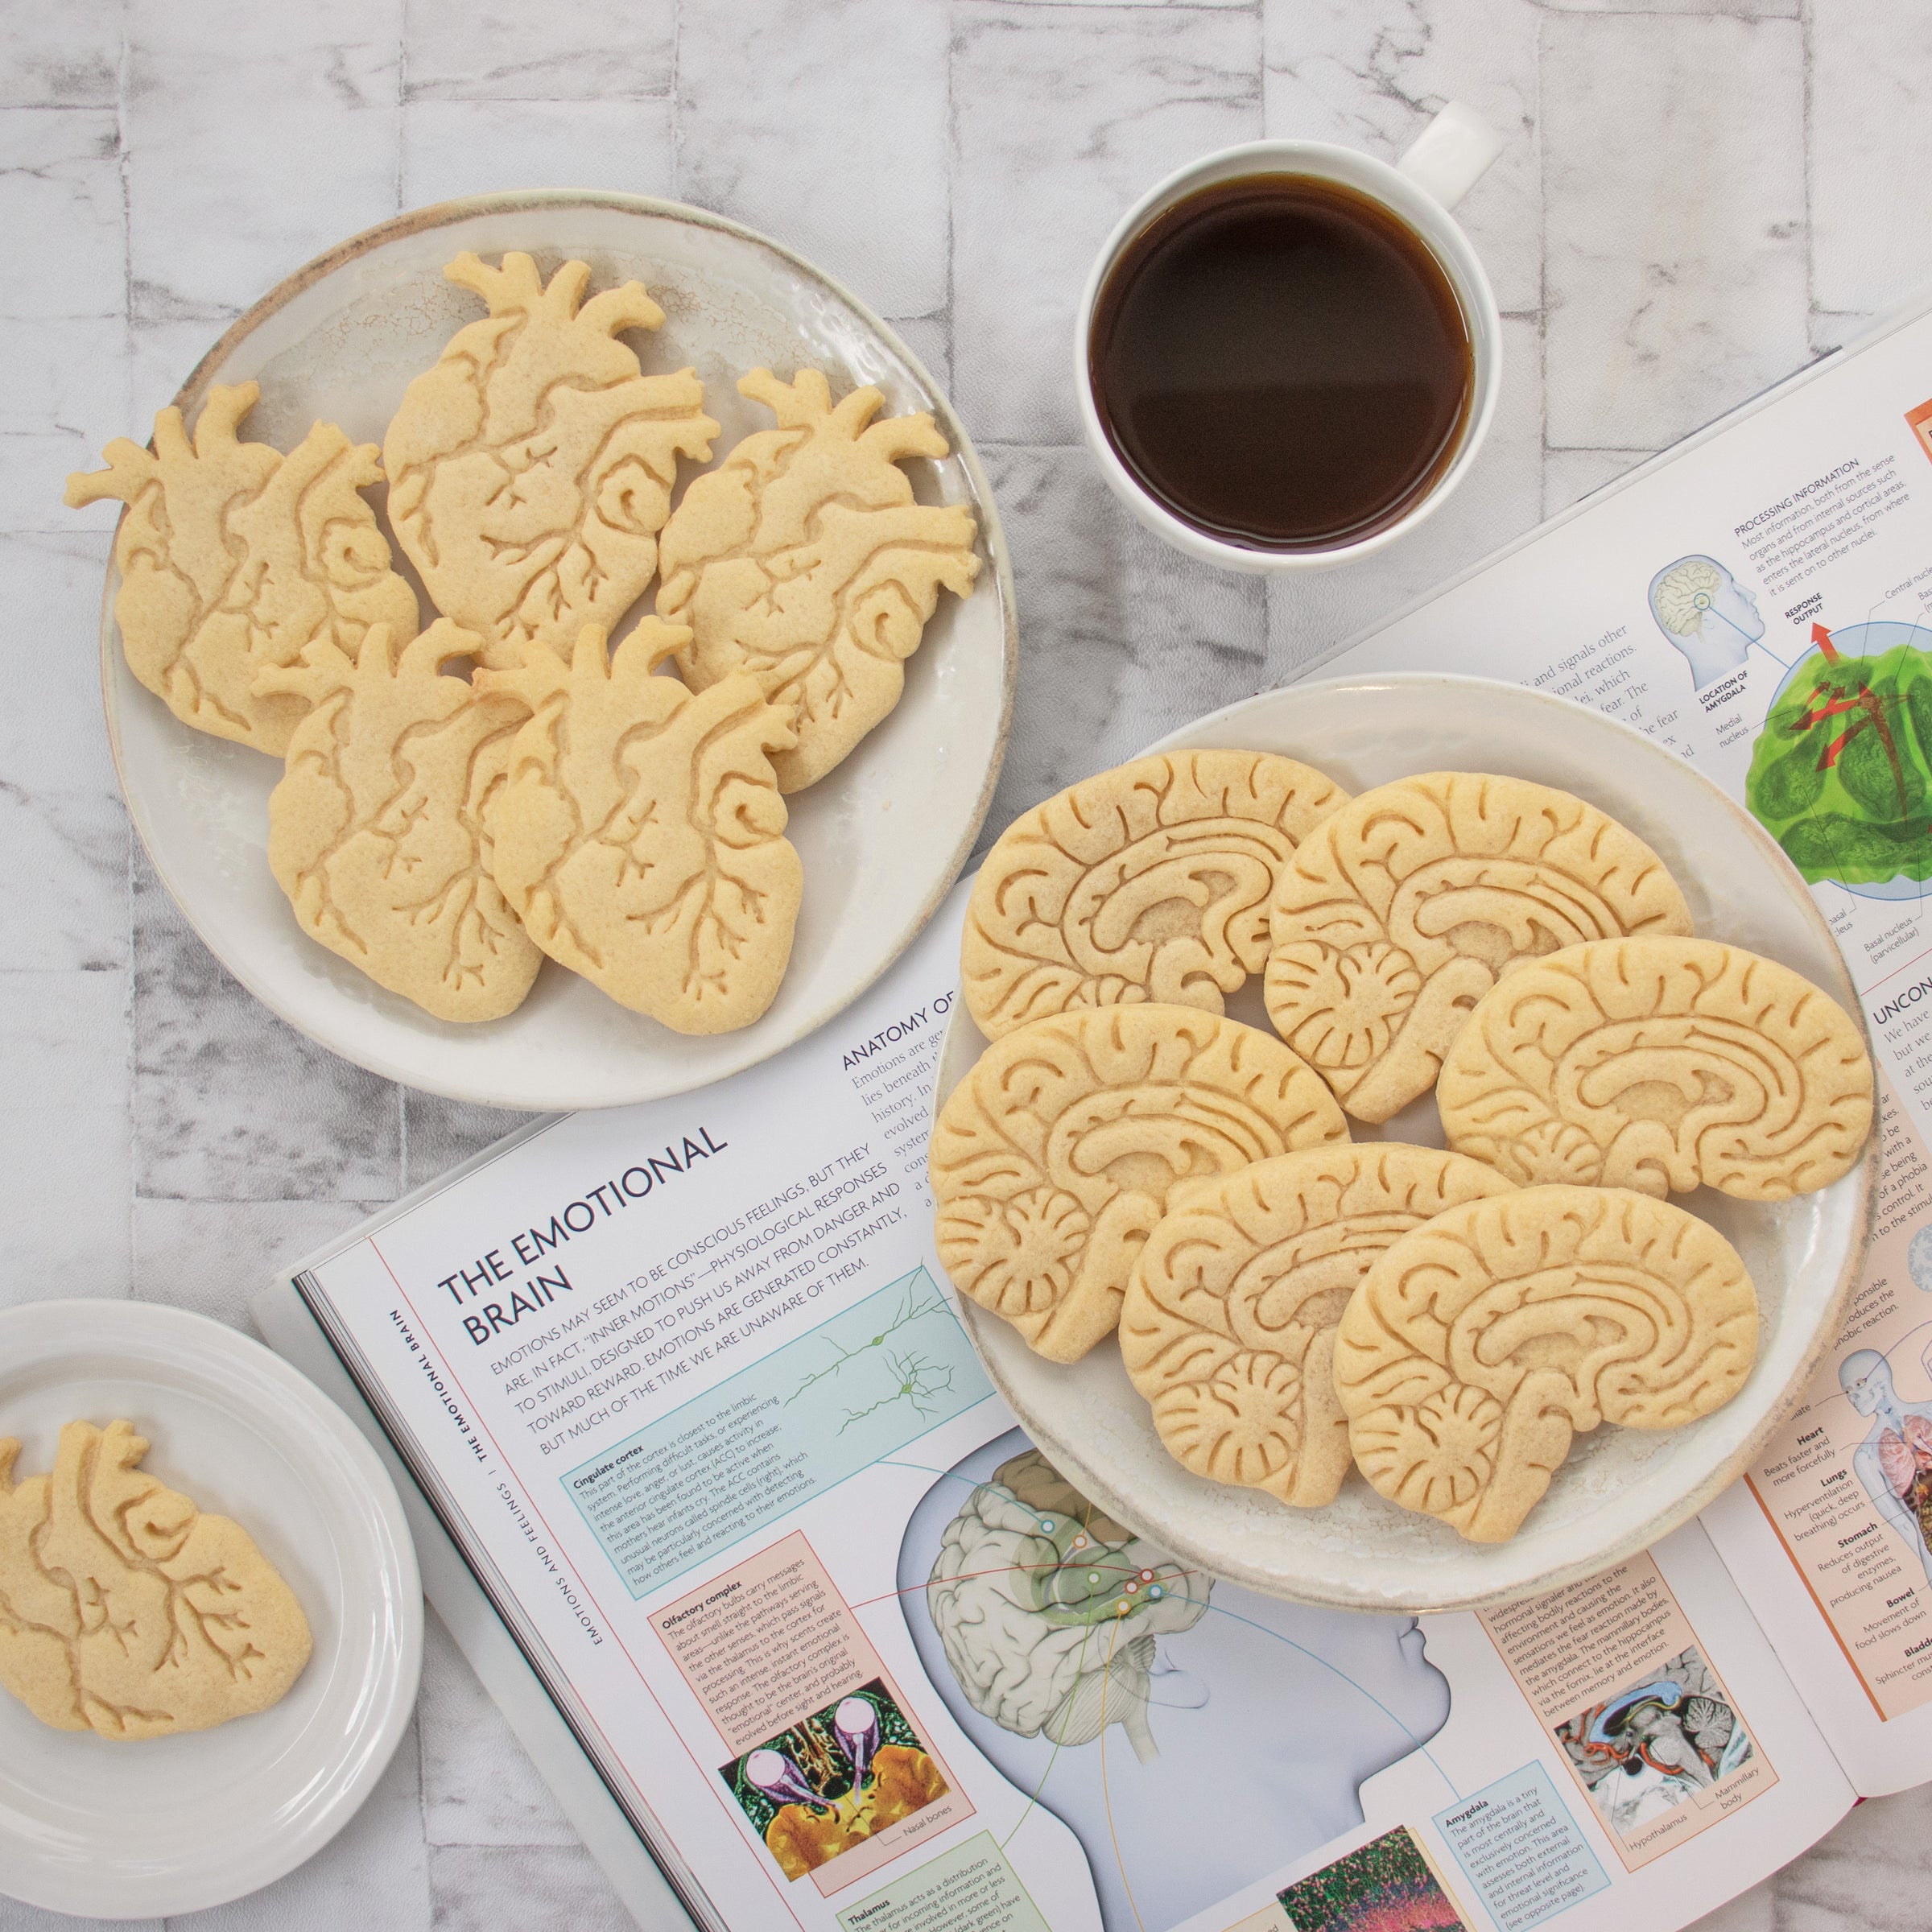 anatomical heart and anatomical brain cookies on plates